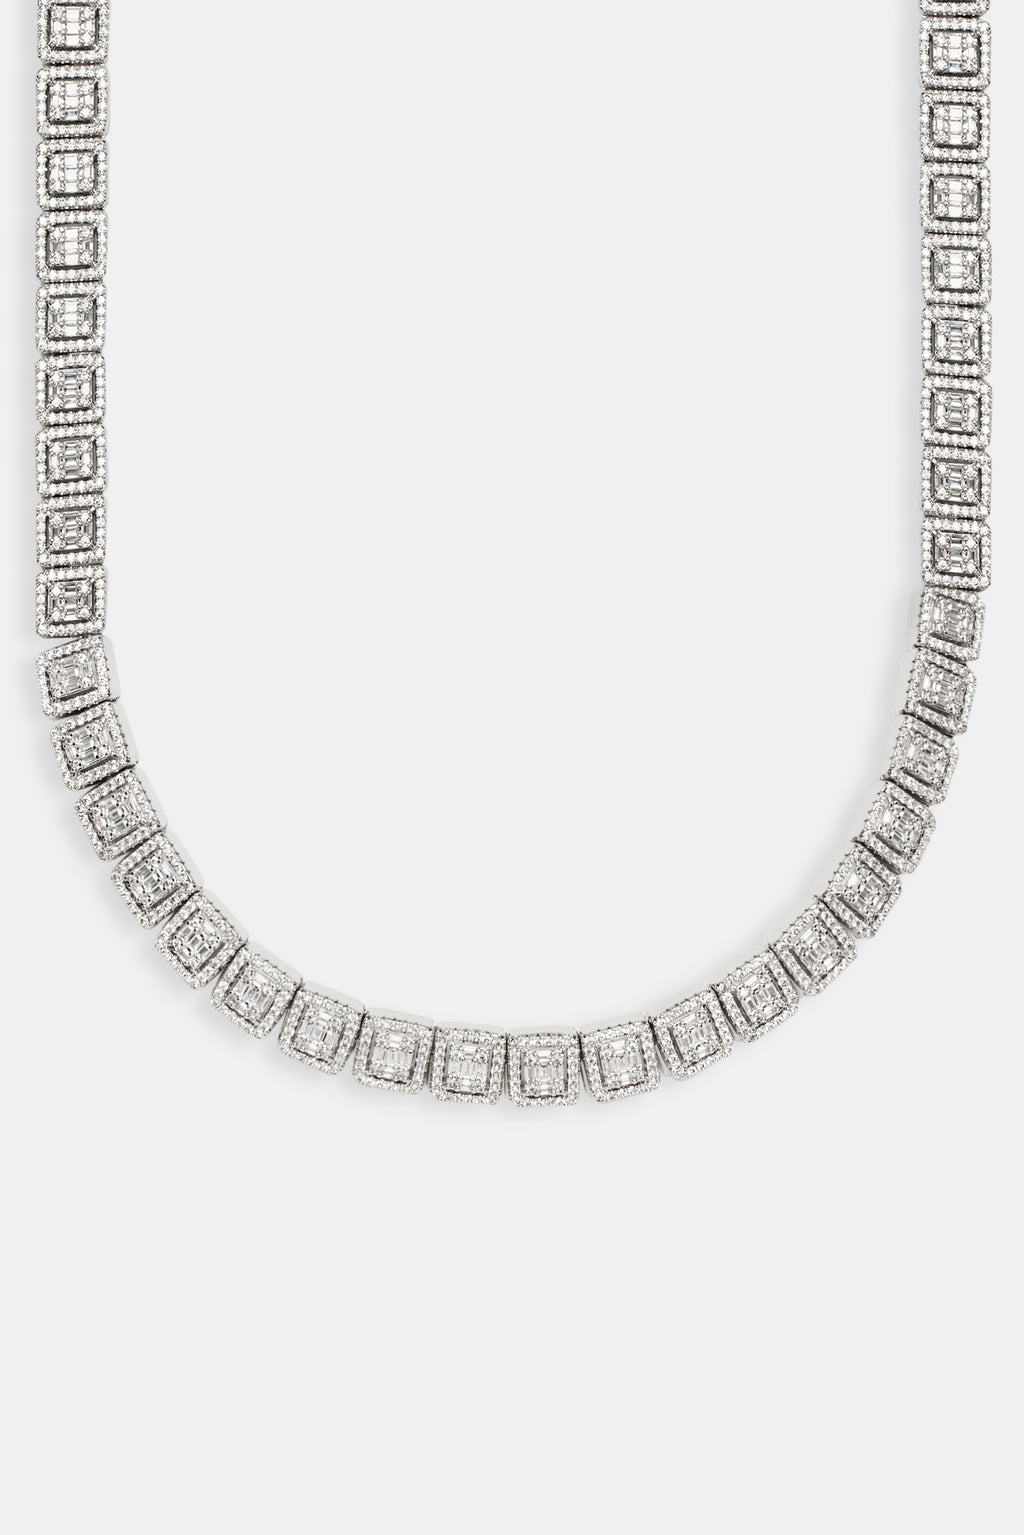 clustered tennis chain shining jewelry baguette| Alibaba.com